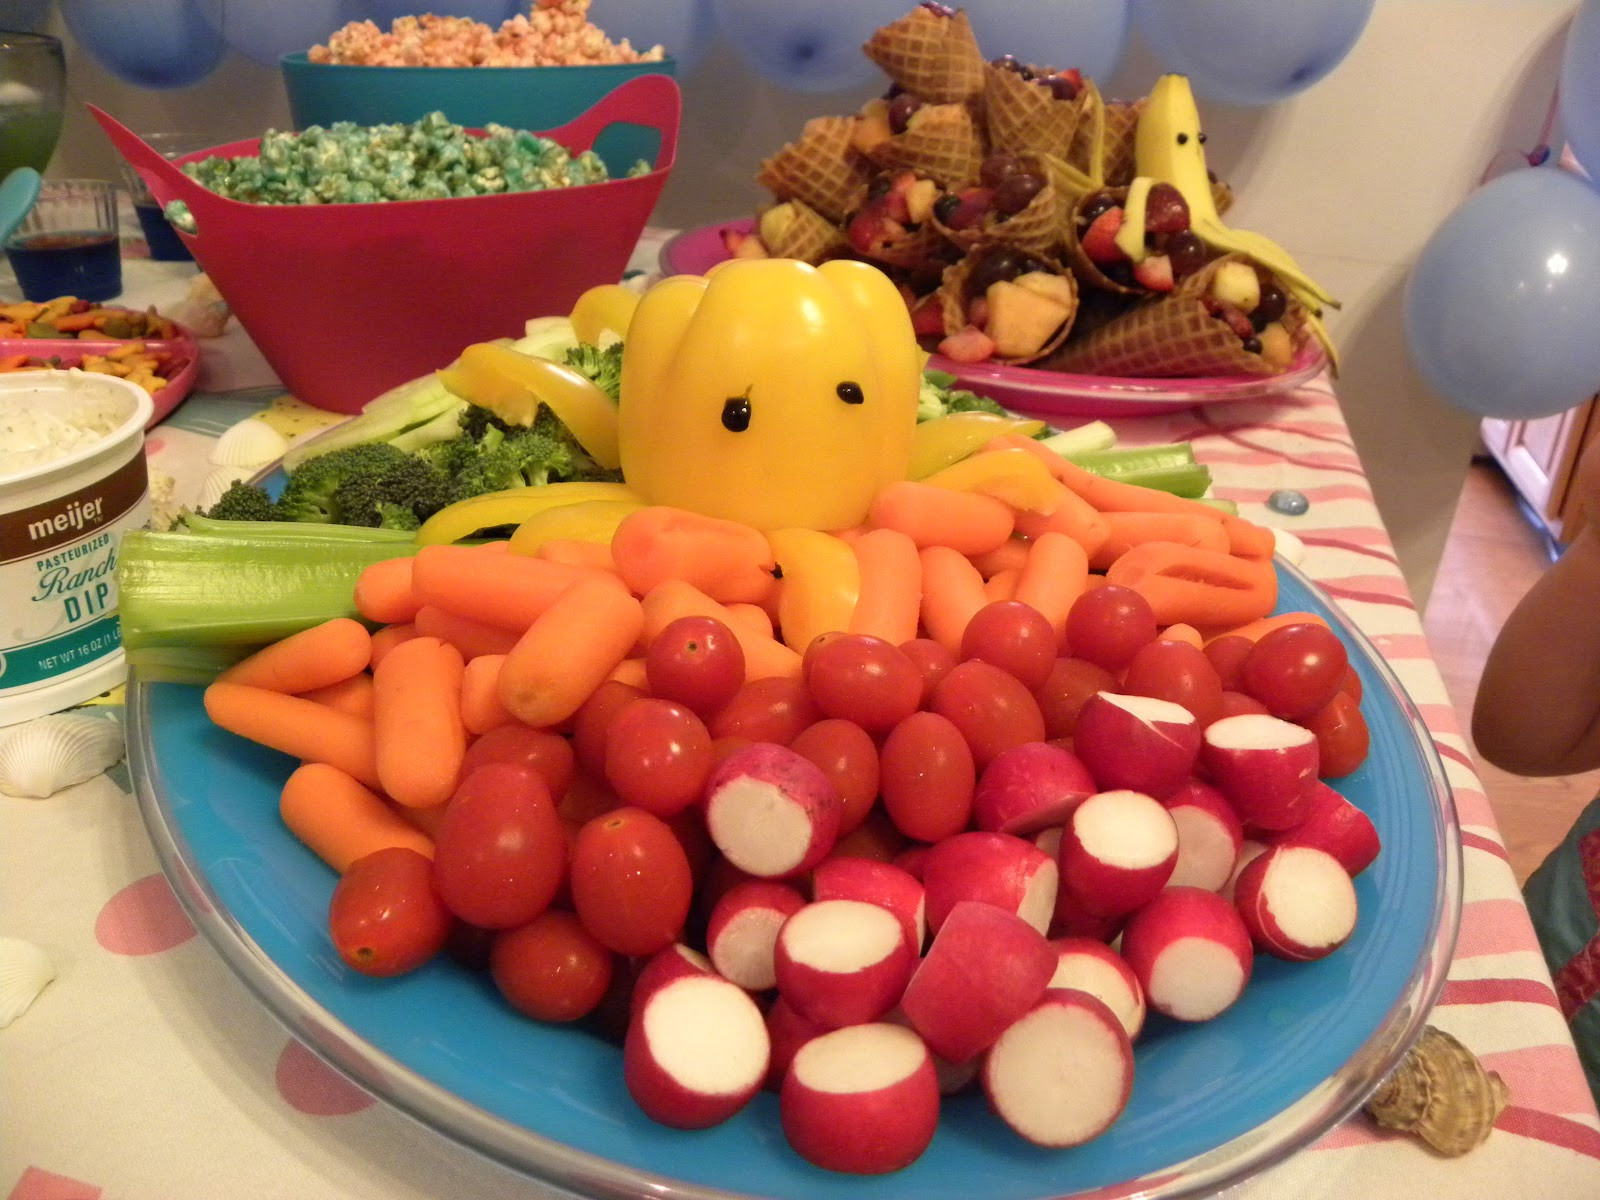 Little Mermaid Party Snack Ideas
 402 Center Street Designs The Mermaid Party